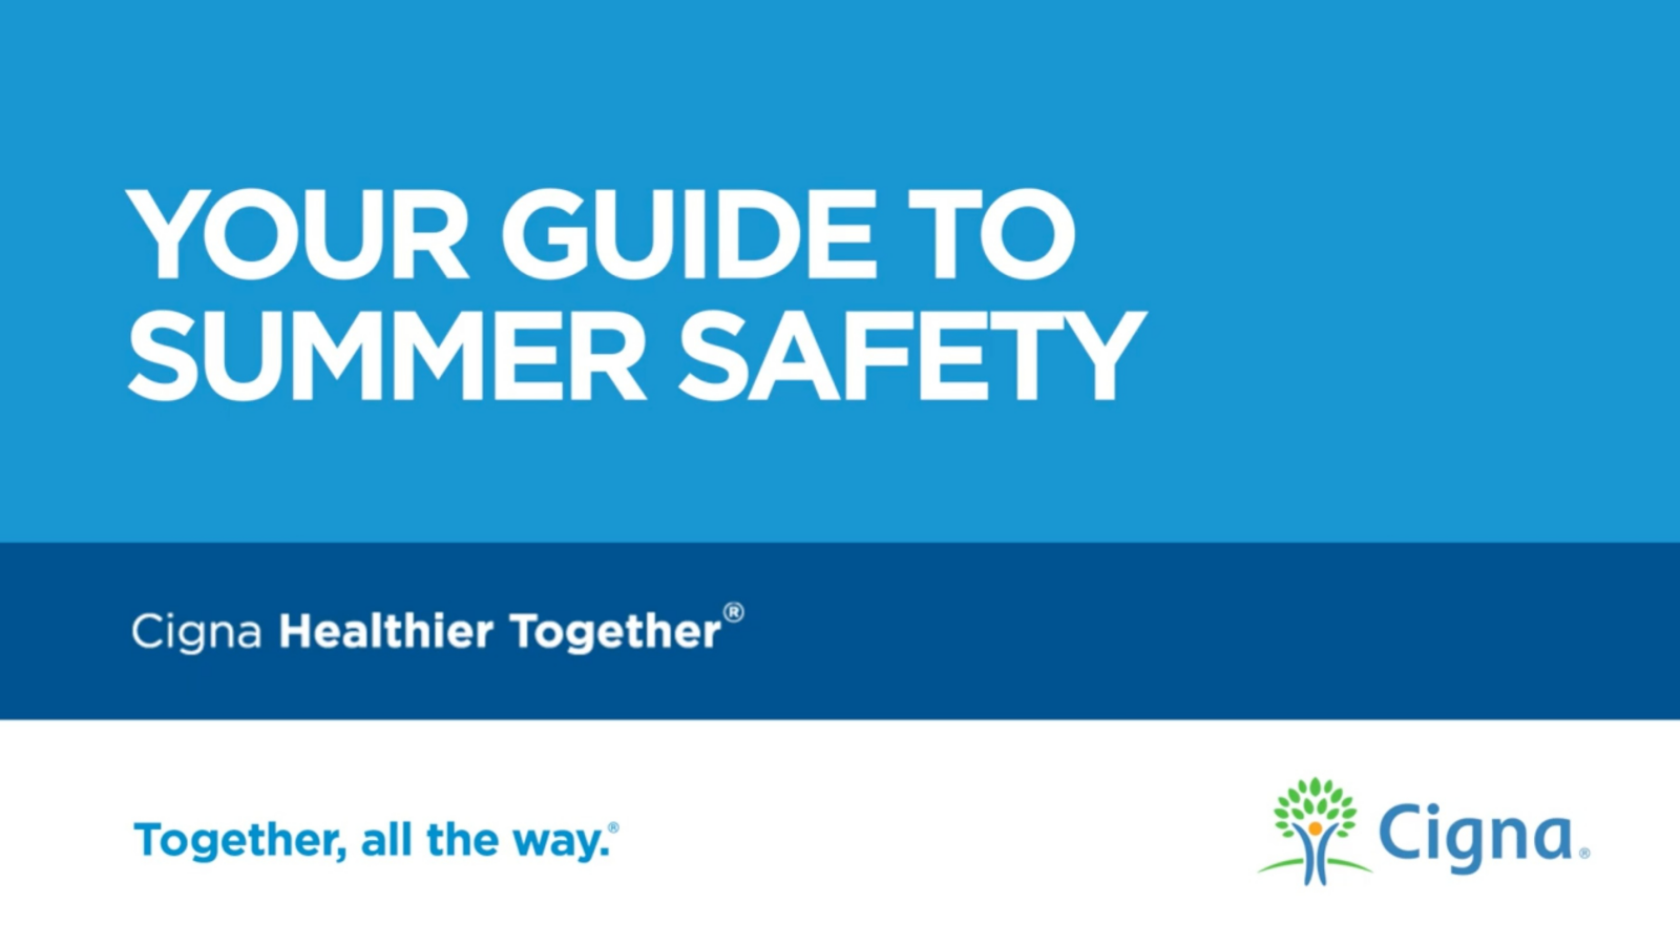 Video: Your Guide to Summer Safety